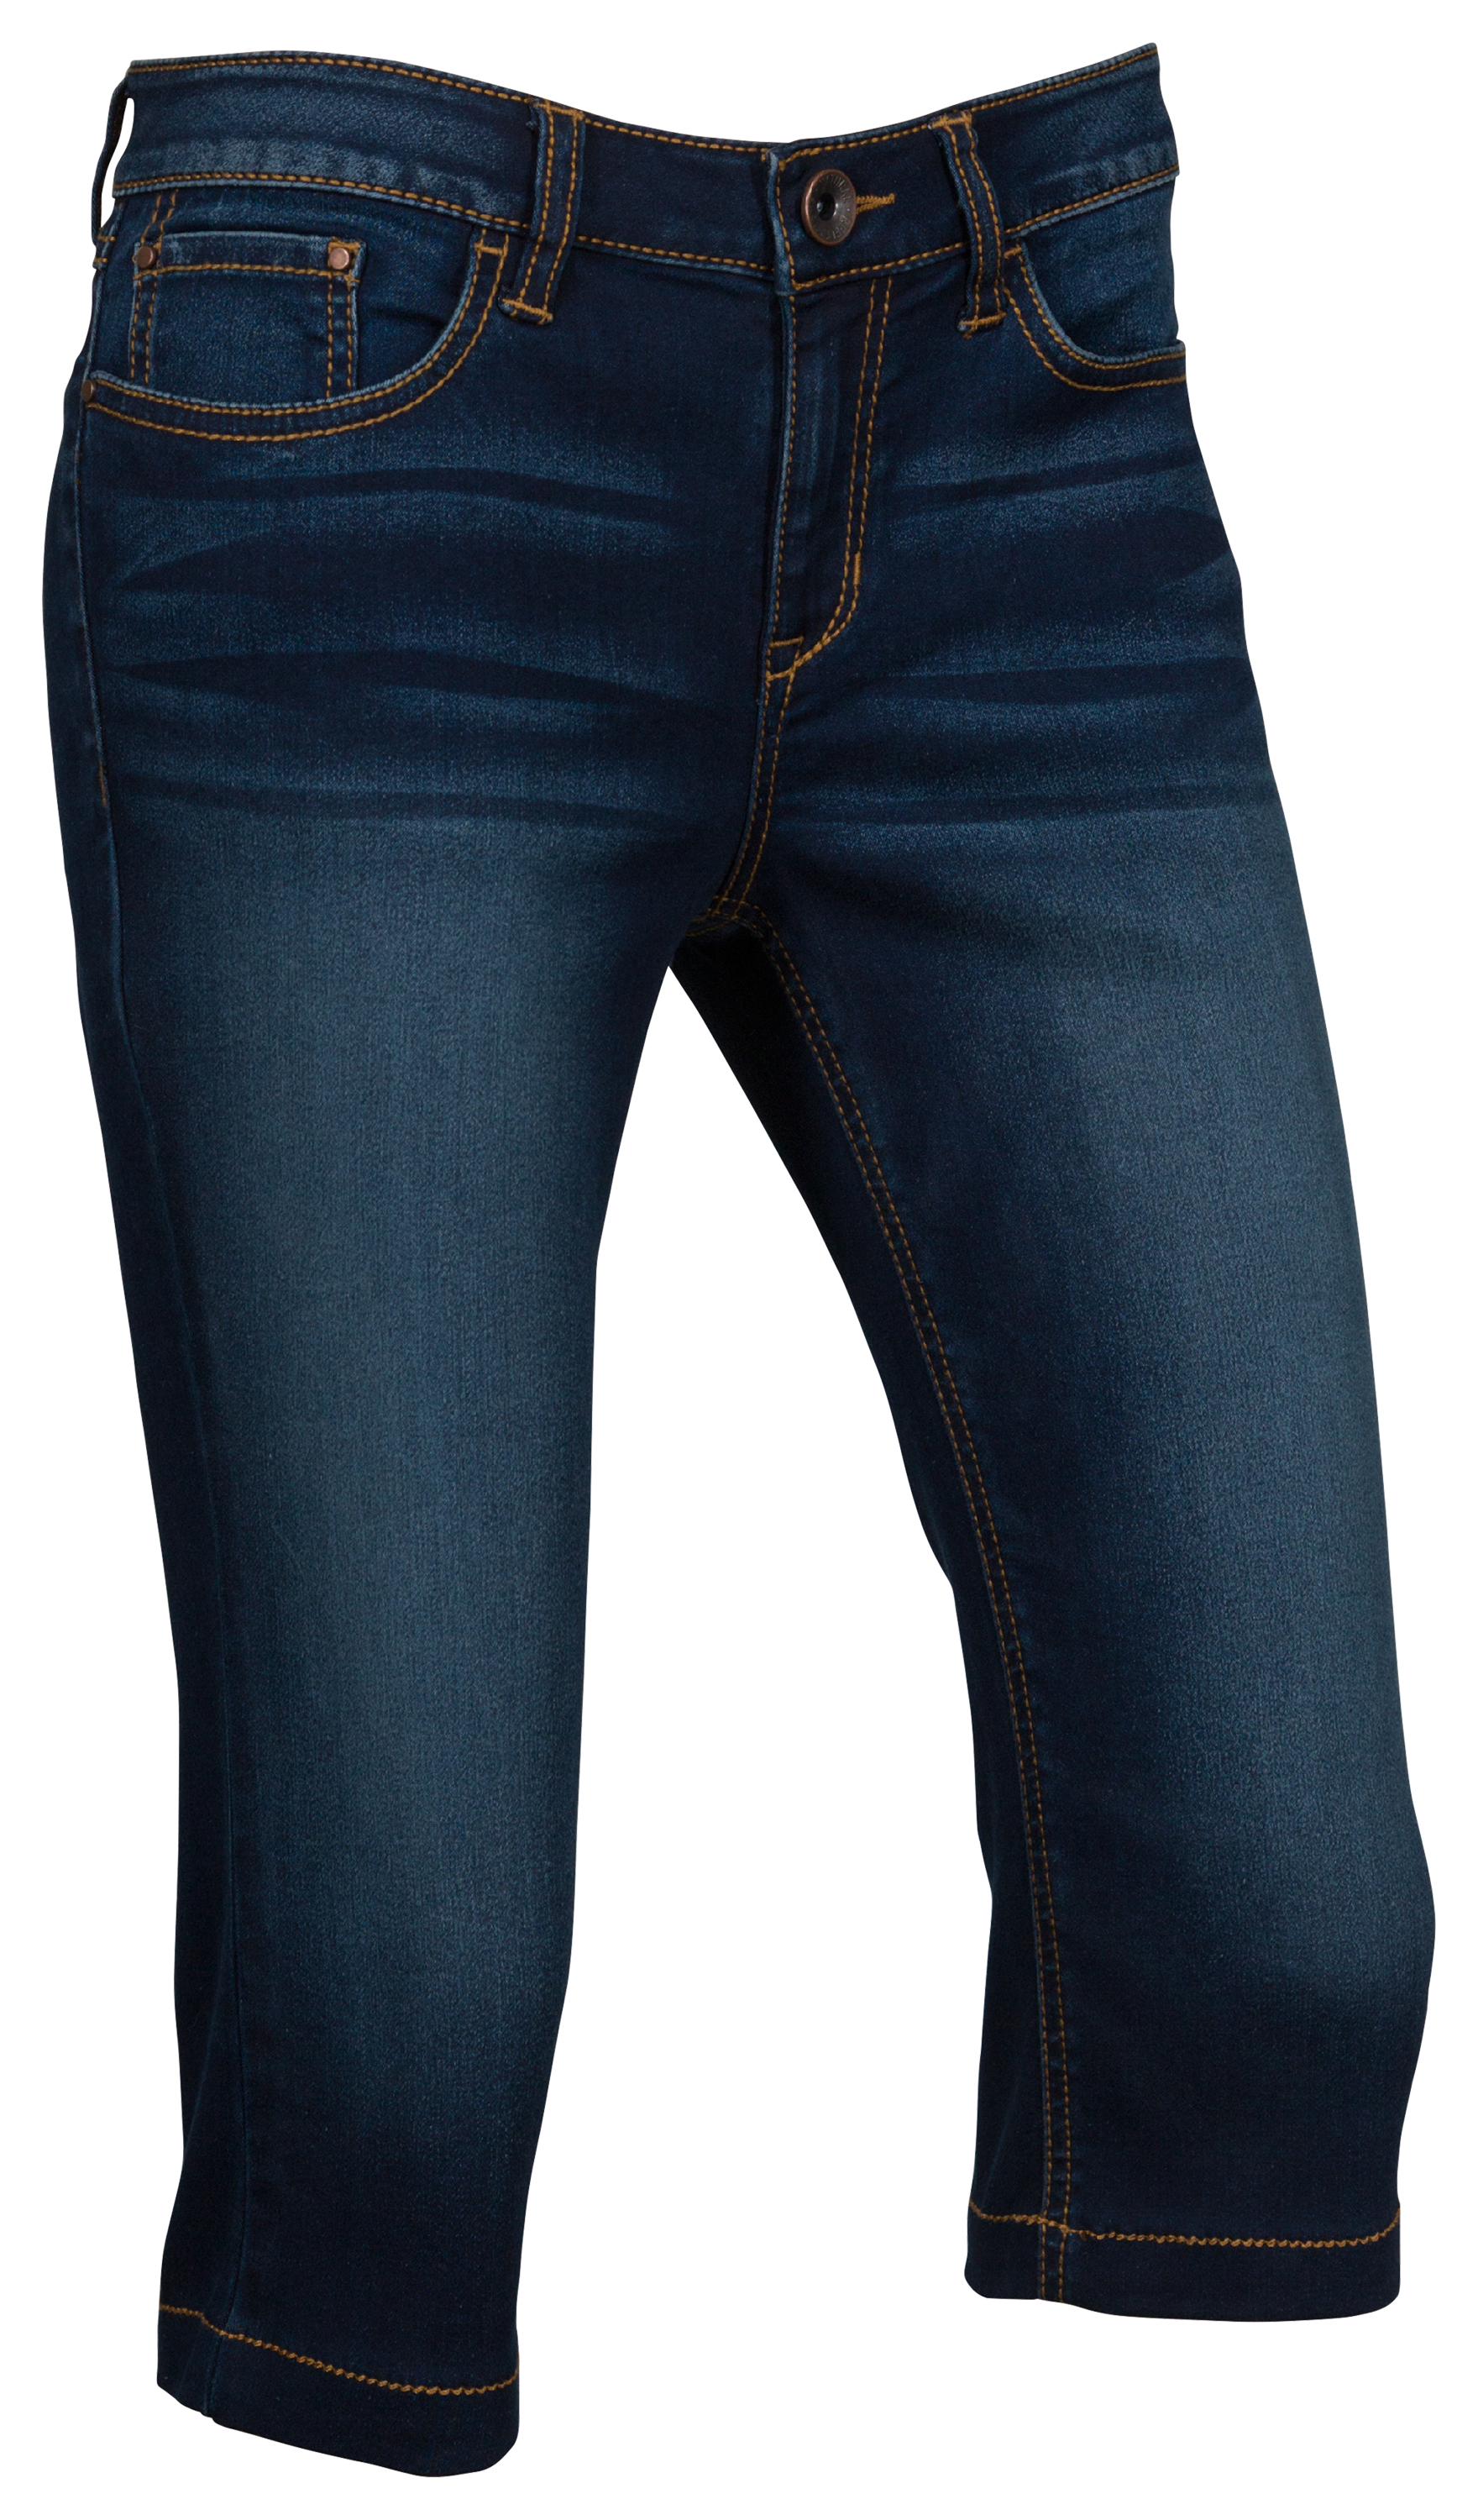 Natural Reflections Stretch Denim Capris for Ladies